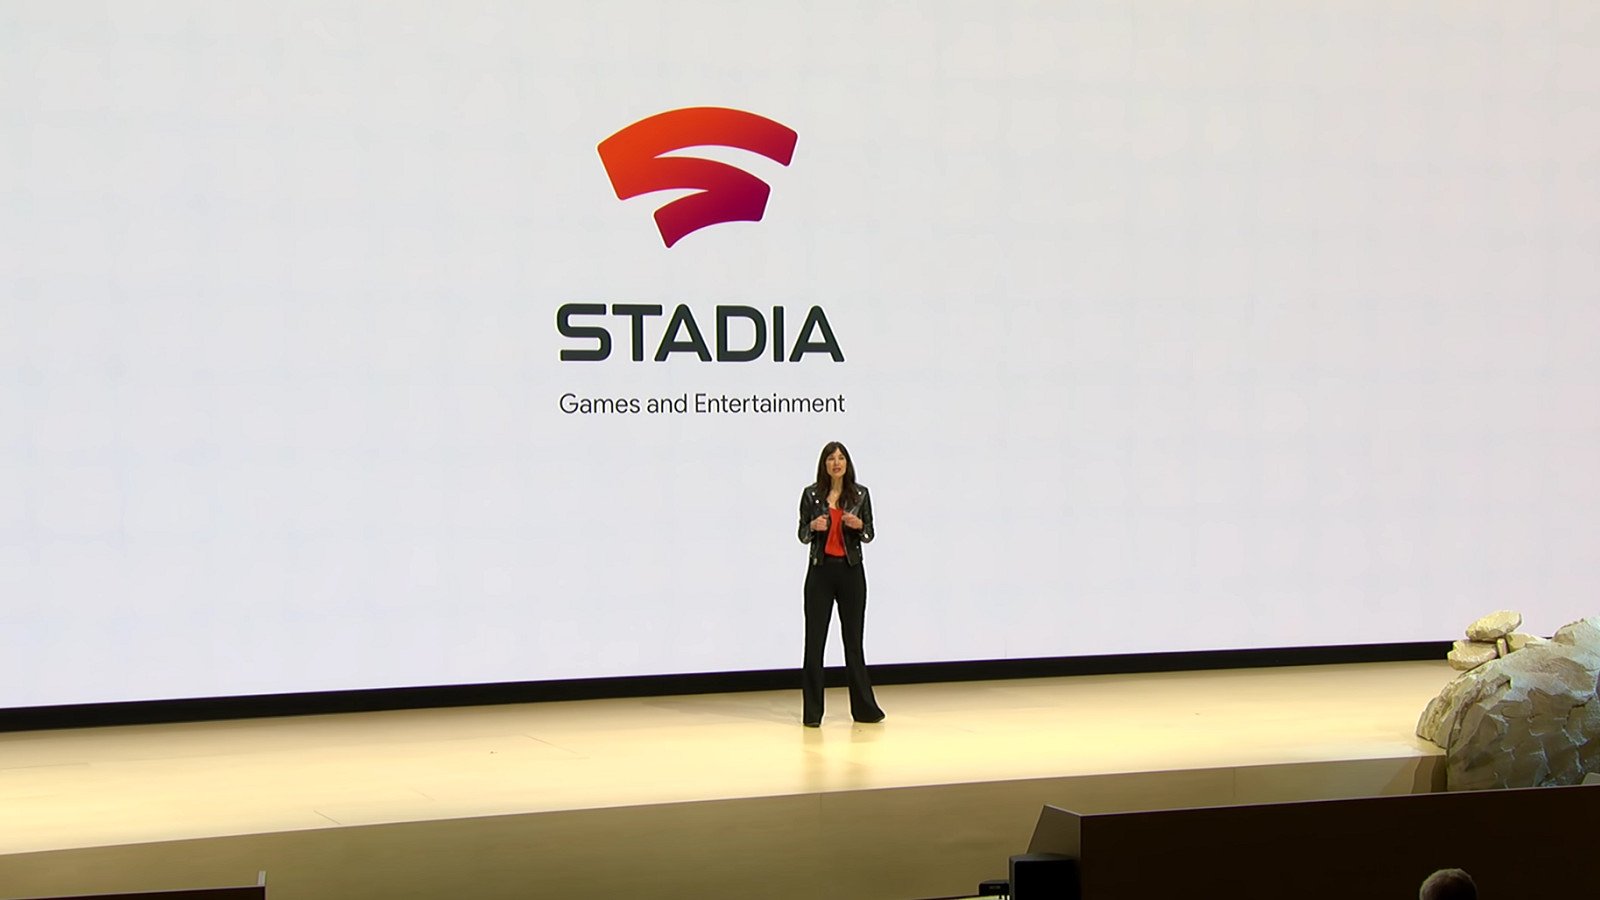 Stadia games entertainment images